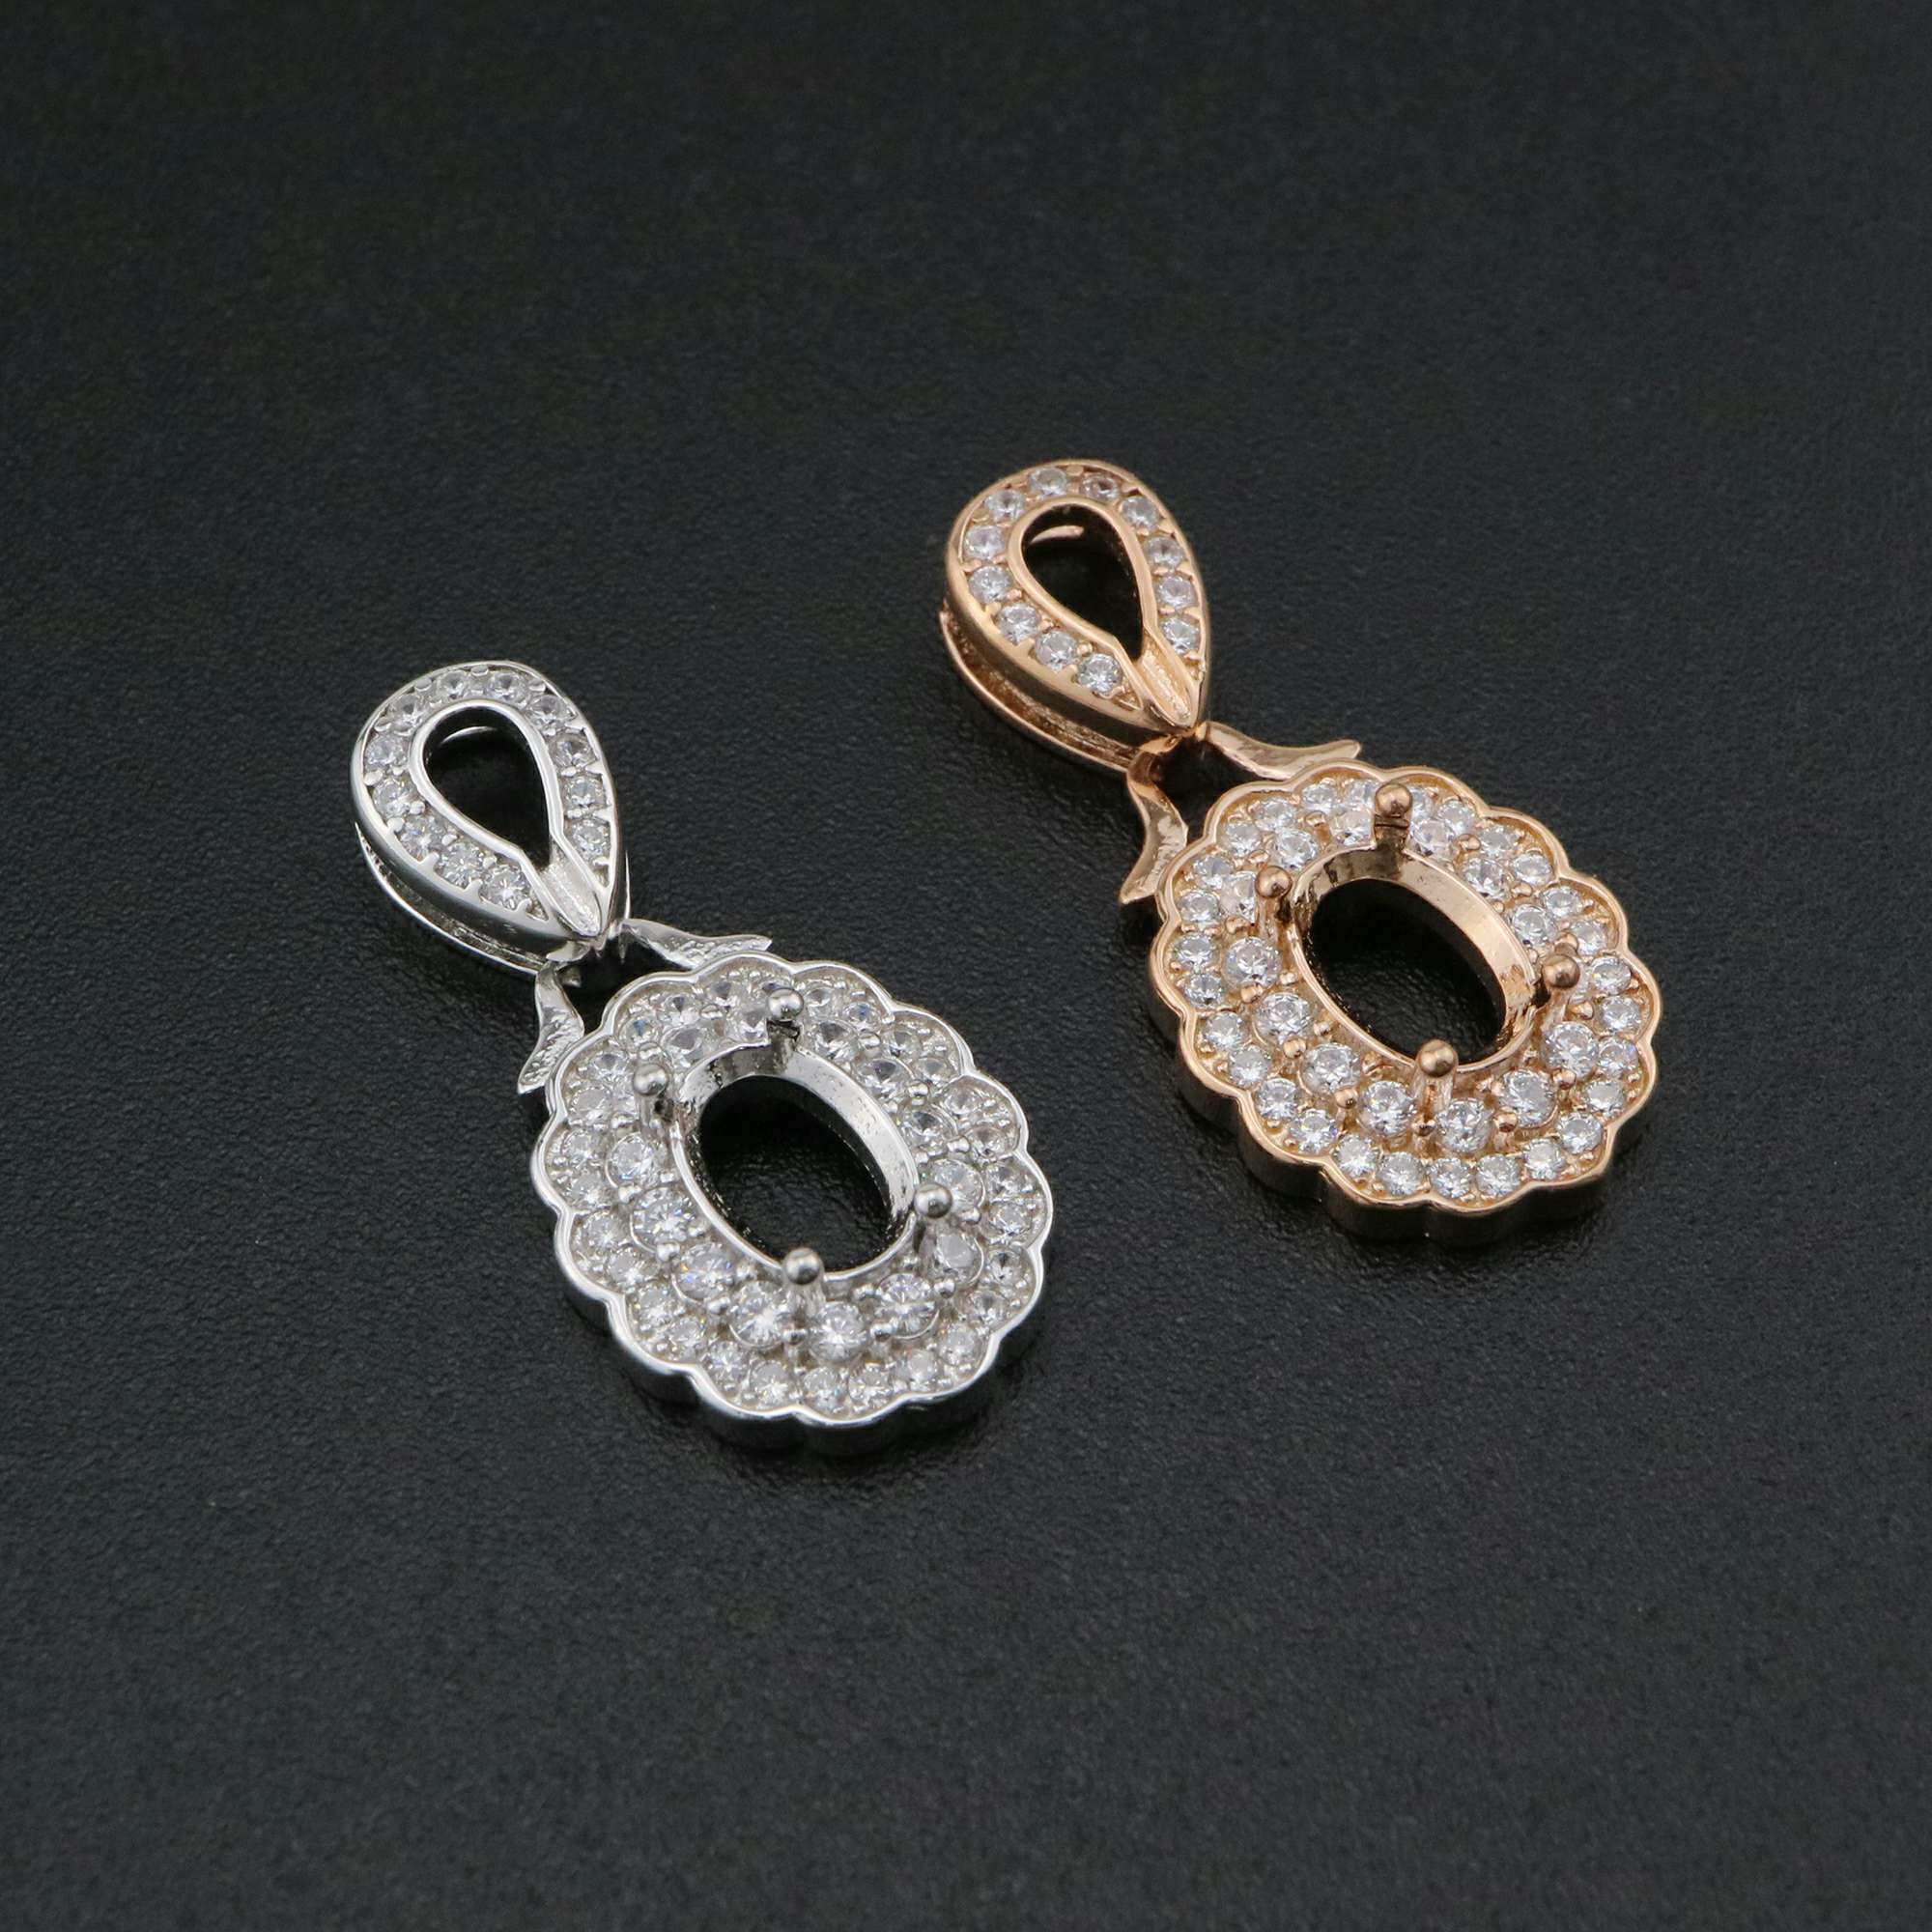 1Pcs 5x7MM Oval Prong Pendant Settings Luxury Pave Rose Gold Plated Solid 925 Sterling Silver Charm Bezel Tray DIY Supplies for Gemstone 1421134 - Click Image to Close